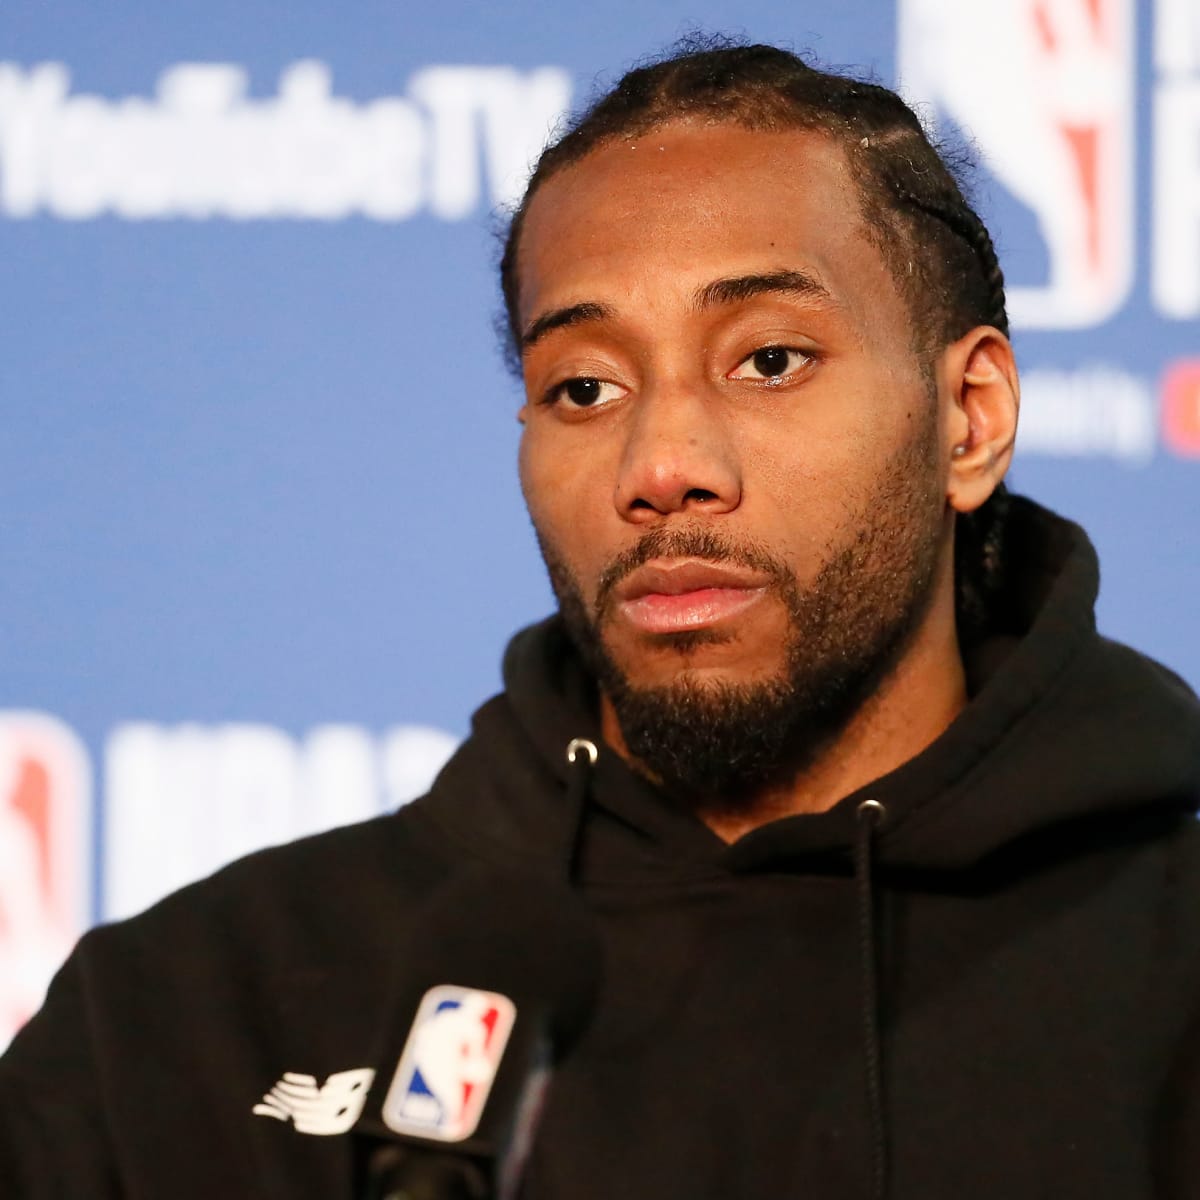 Nike may not have a lot to gain taking on Kawhi Leonard over 'Klaw